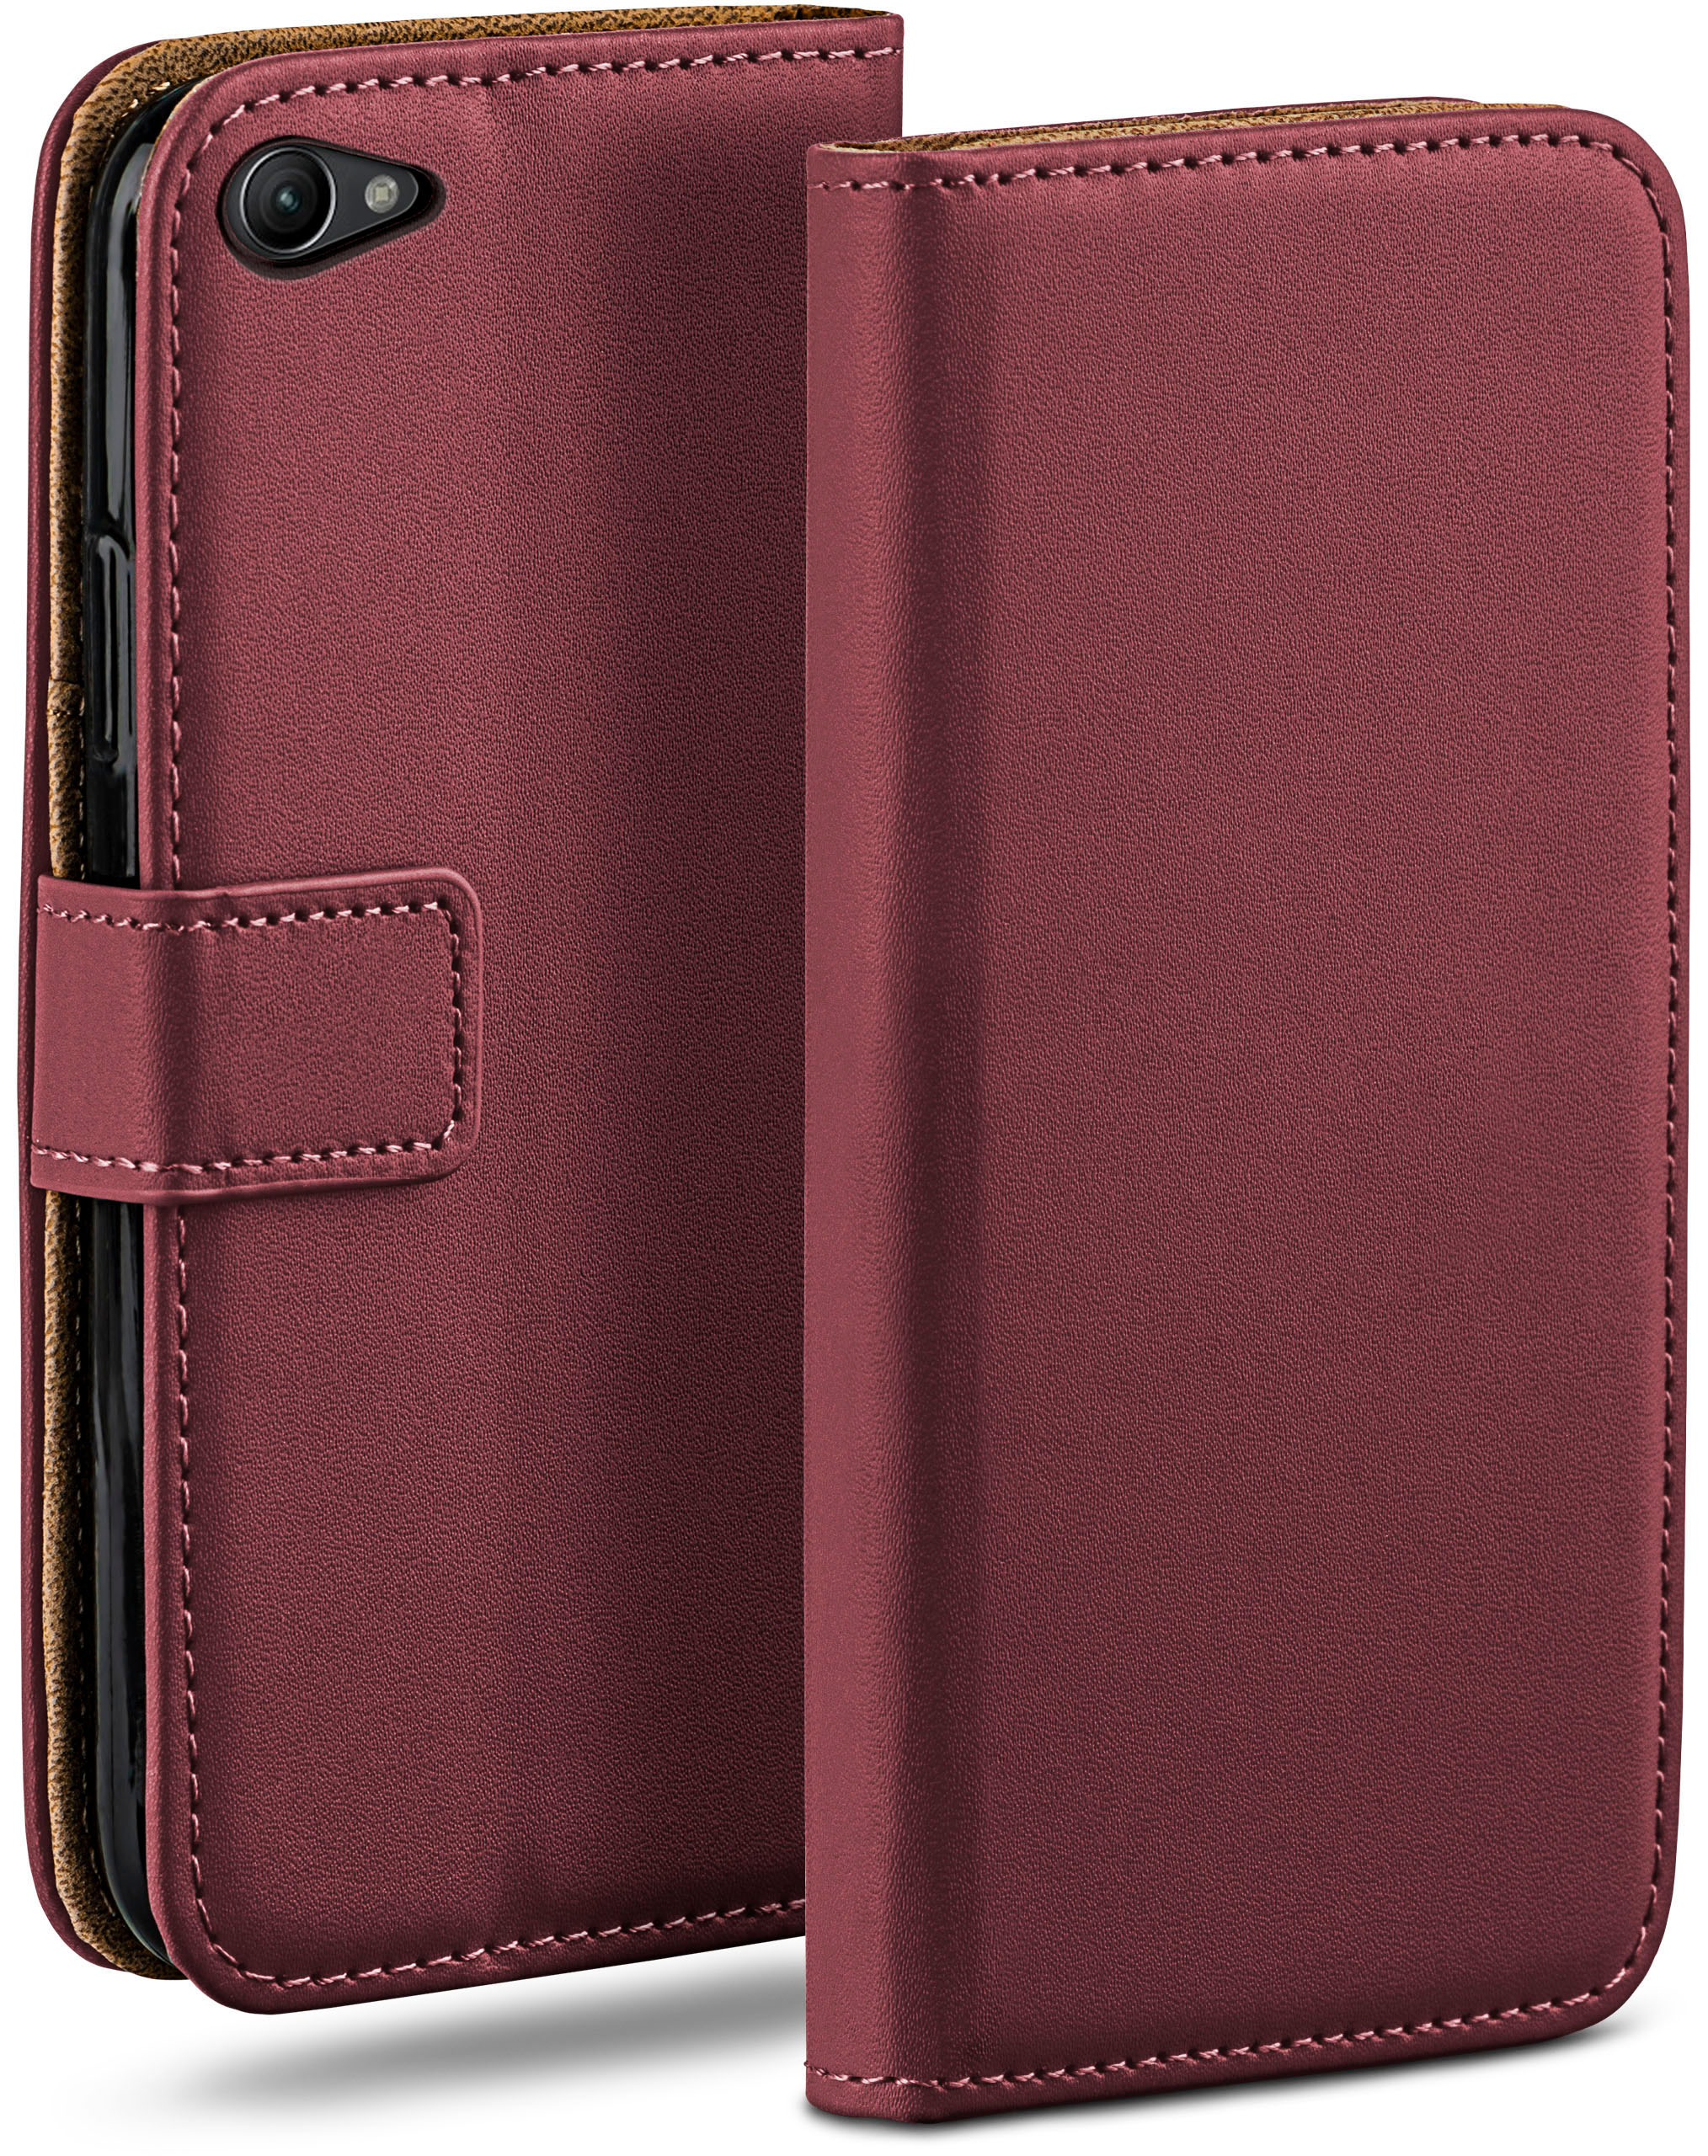 Maroon-Red Book Z1 Xperia Bookcover, Case, MOEX Compact, Sony,